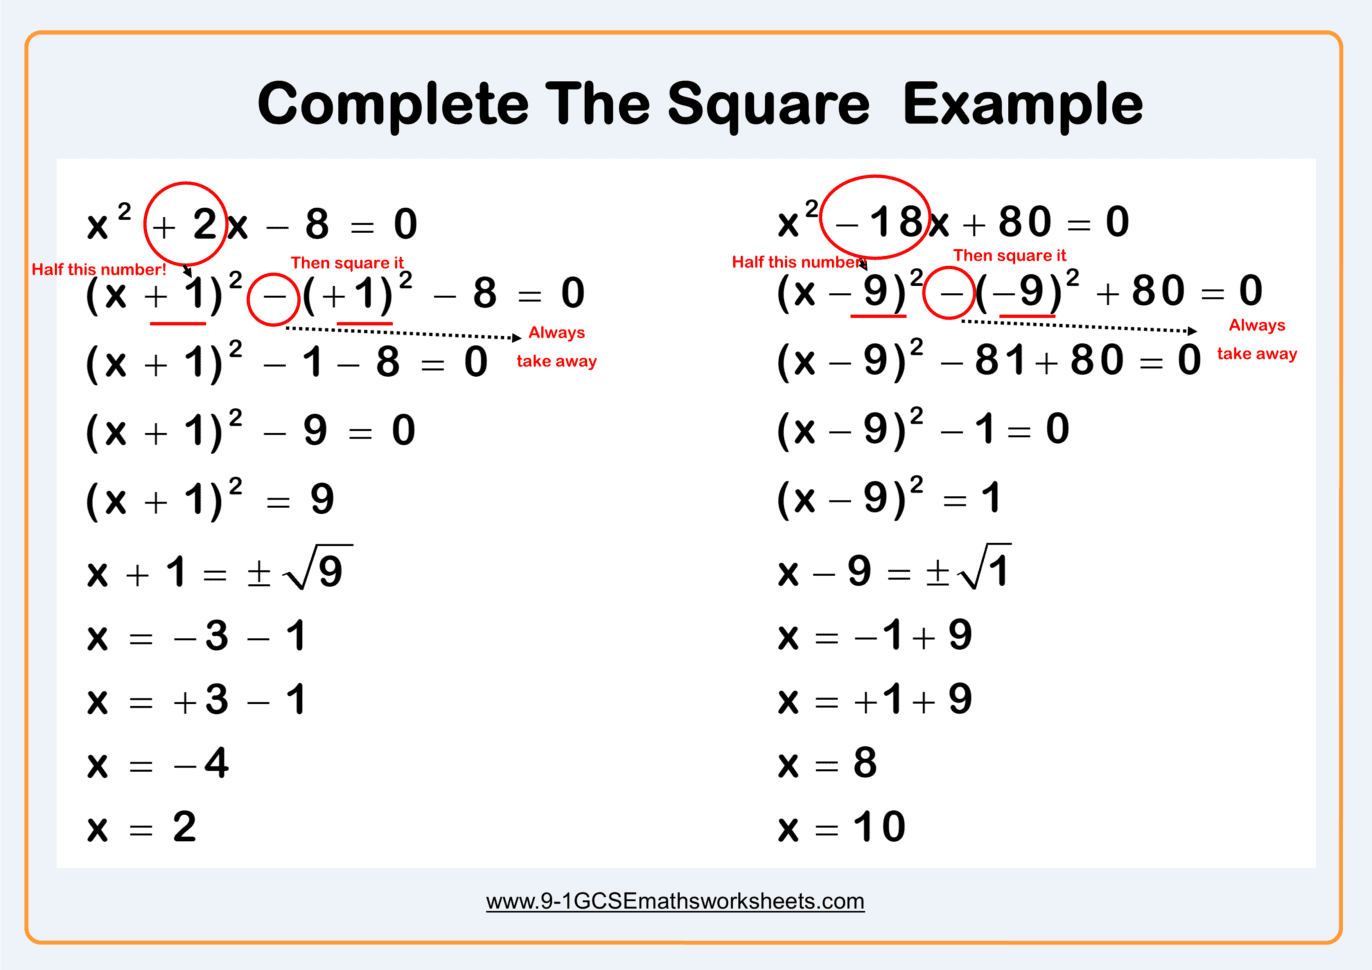 completing-the-square-worksheet-practice-questions-cazoomy-db-excel